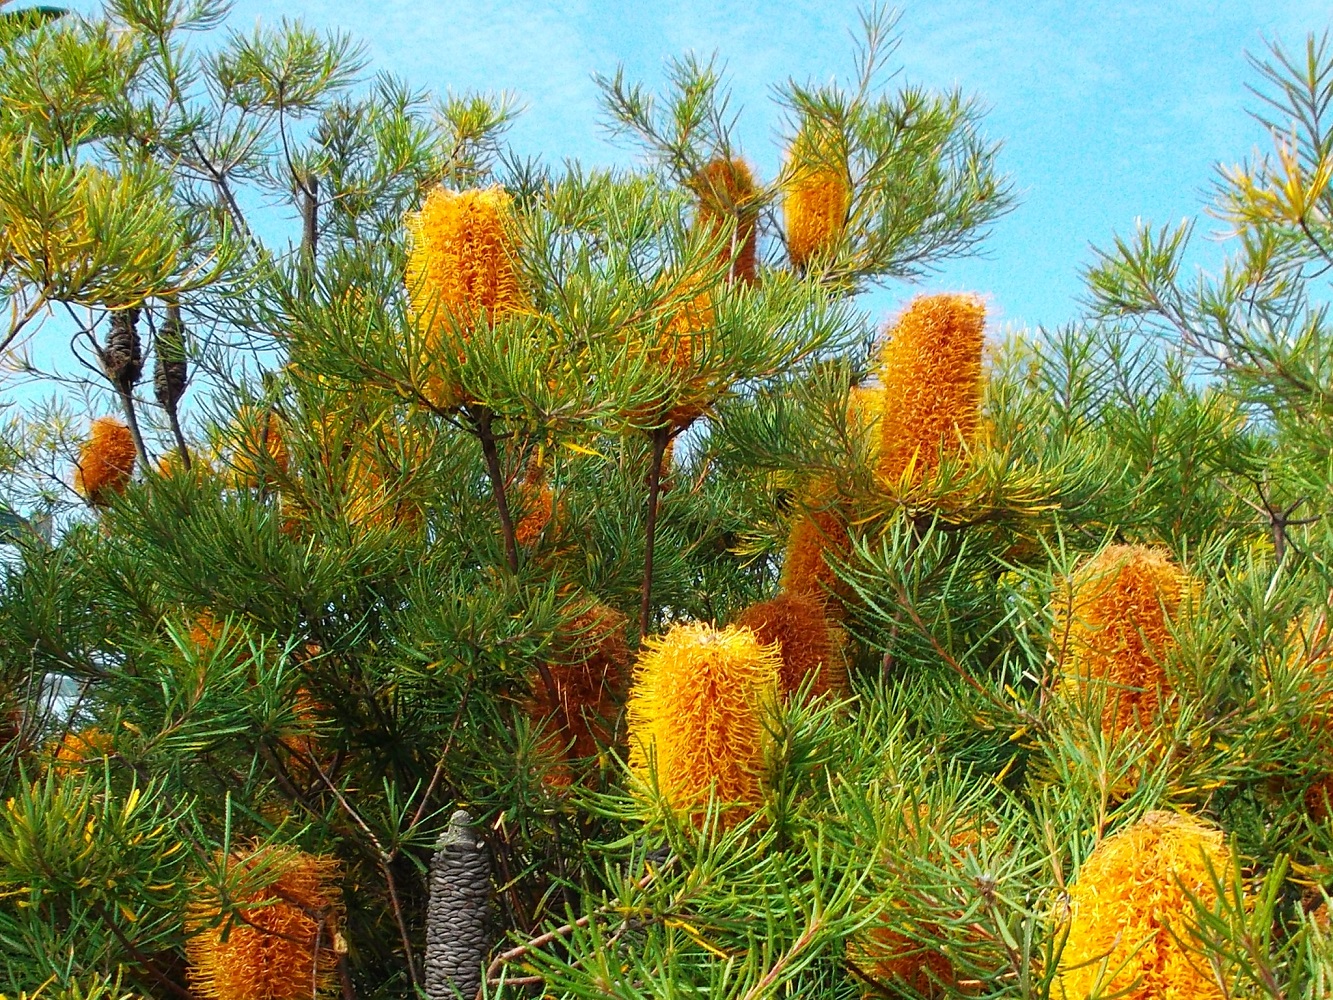 YELLOW BANKSIA by GREENFROGGY1